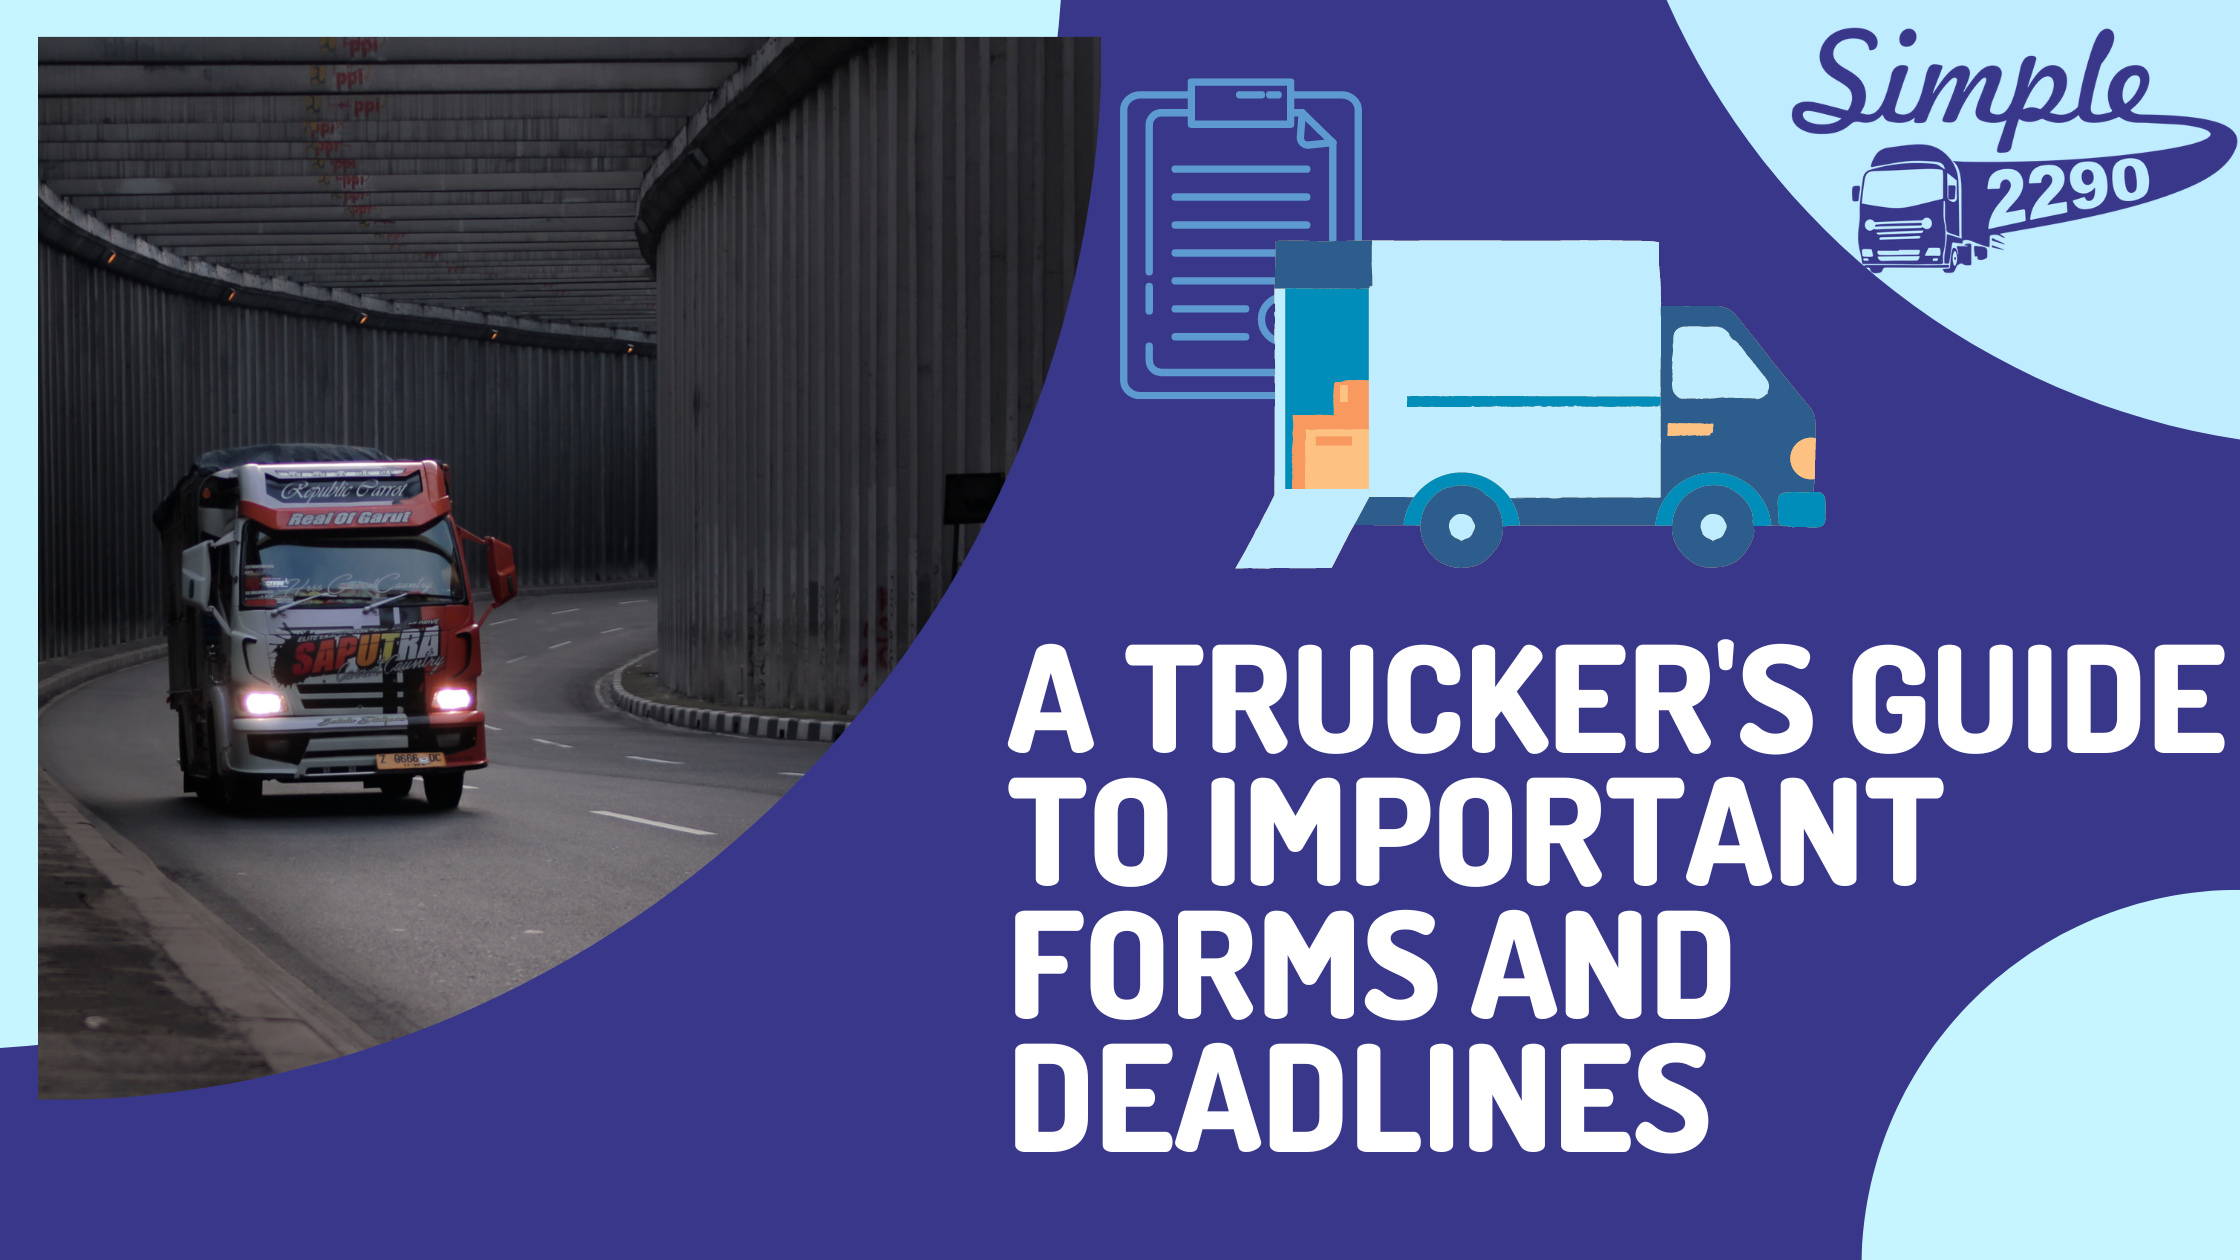 A trucker's guide to important forms and deadlines